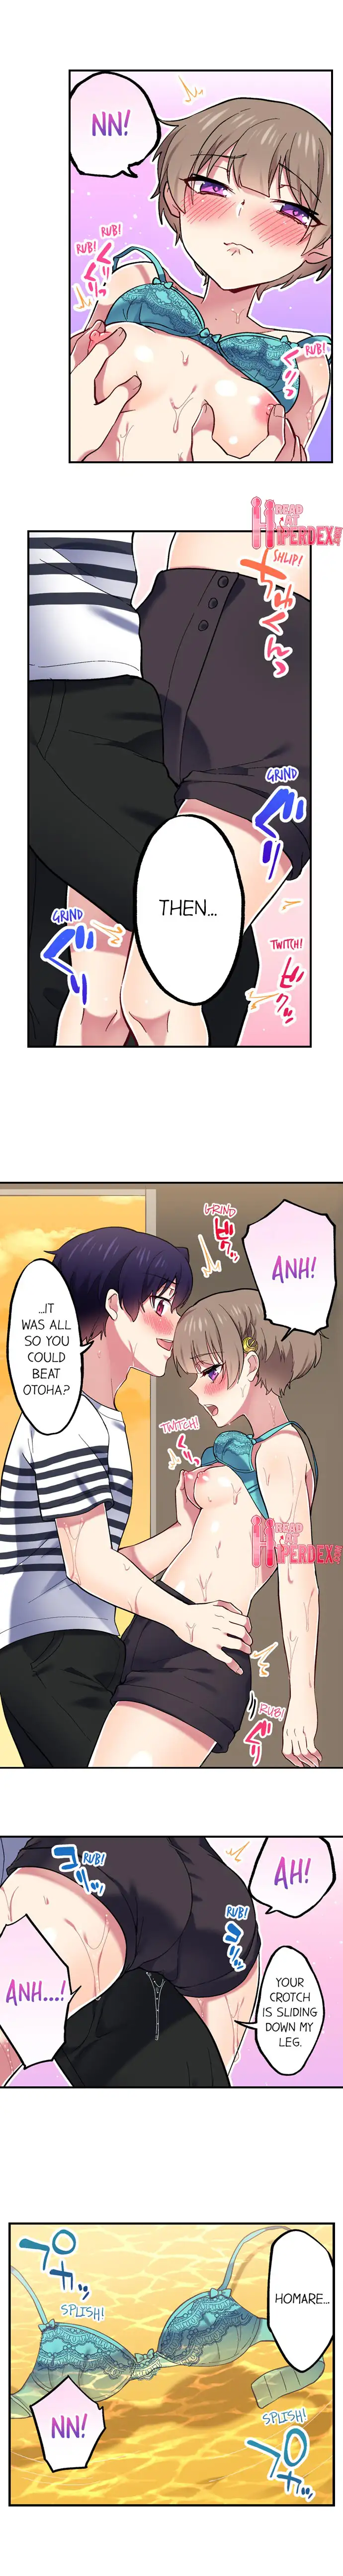 Committee Chairman, Didn’t You Just Masturbate In the Bathroom? I Can See the Number of Times People Orgasm - Chapter 86 Page 6